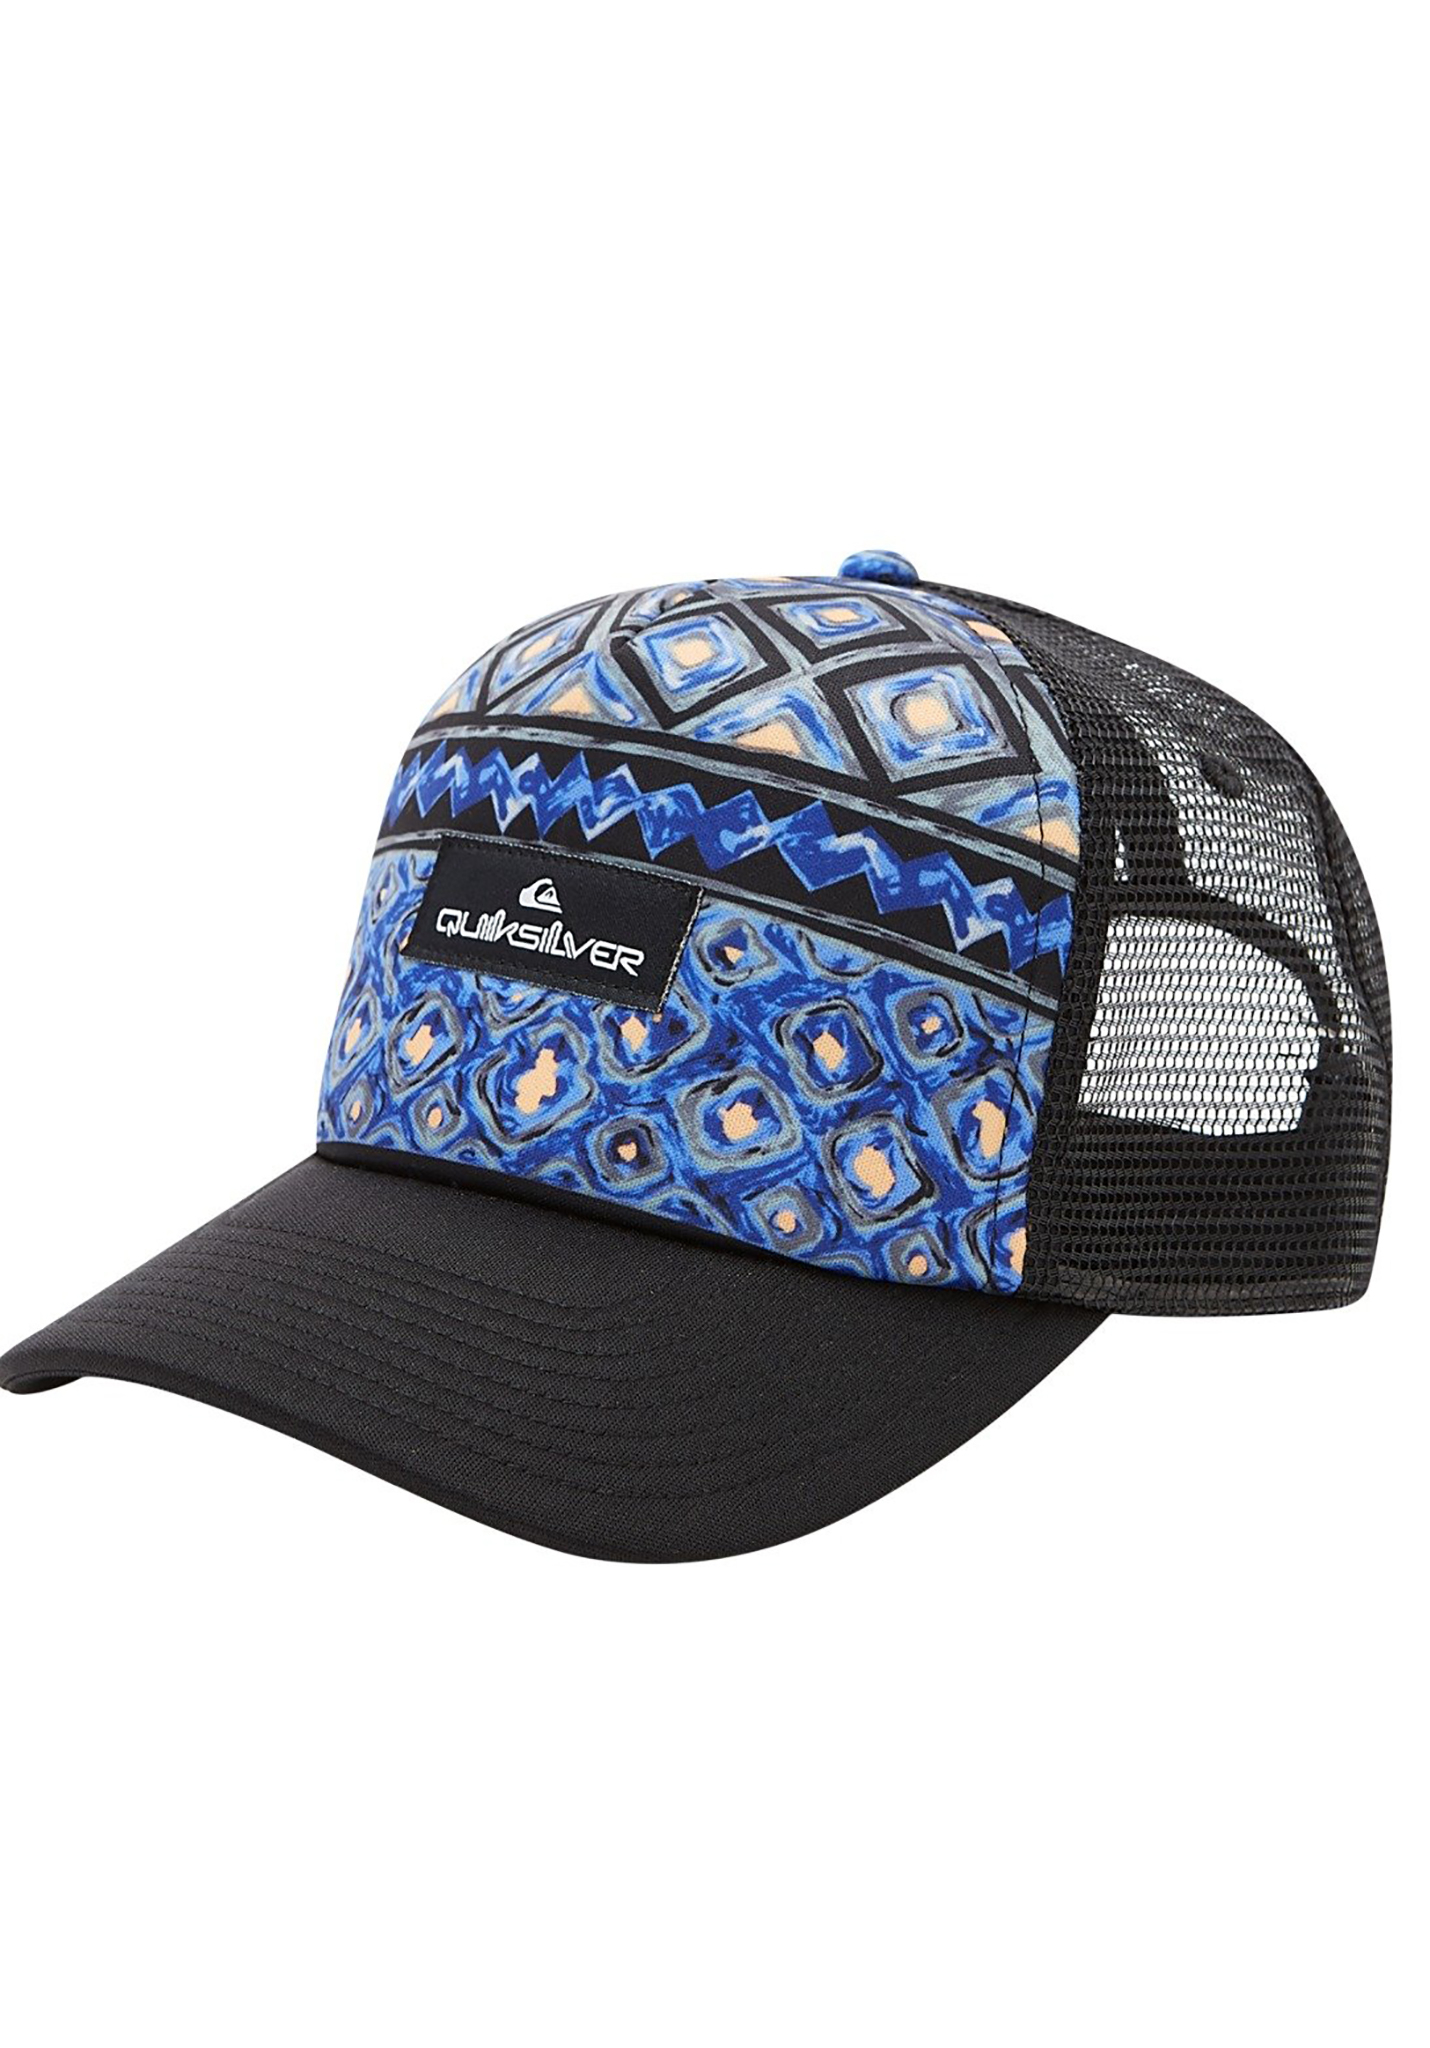 Quiksilver Leash Pull Strapback Cap eisentor One Size